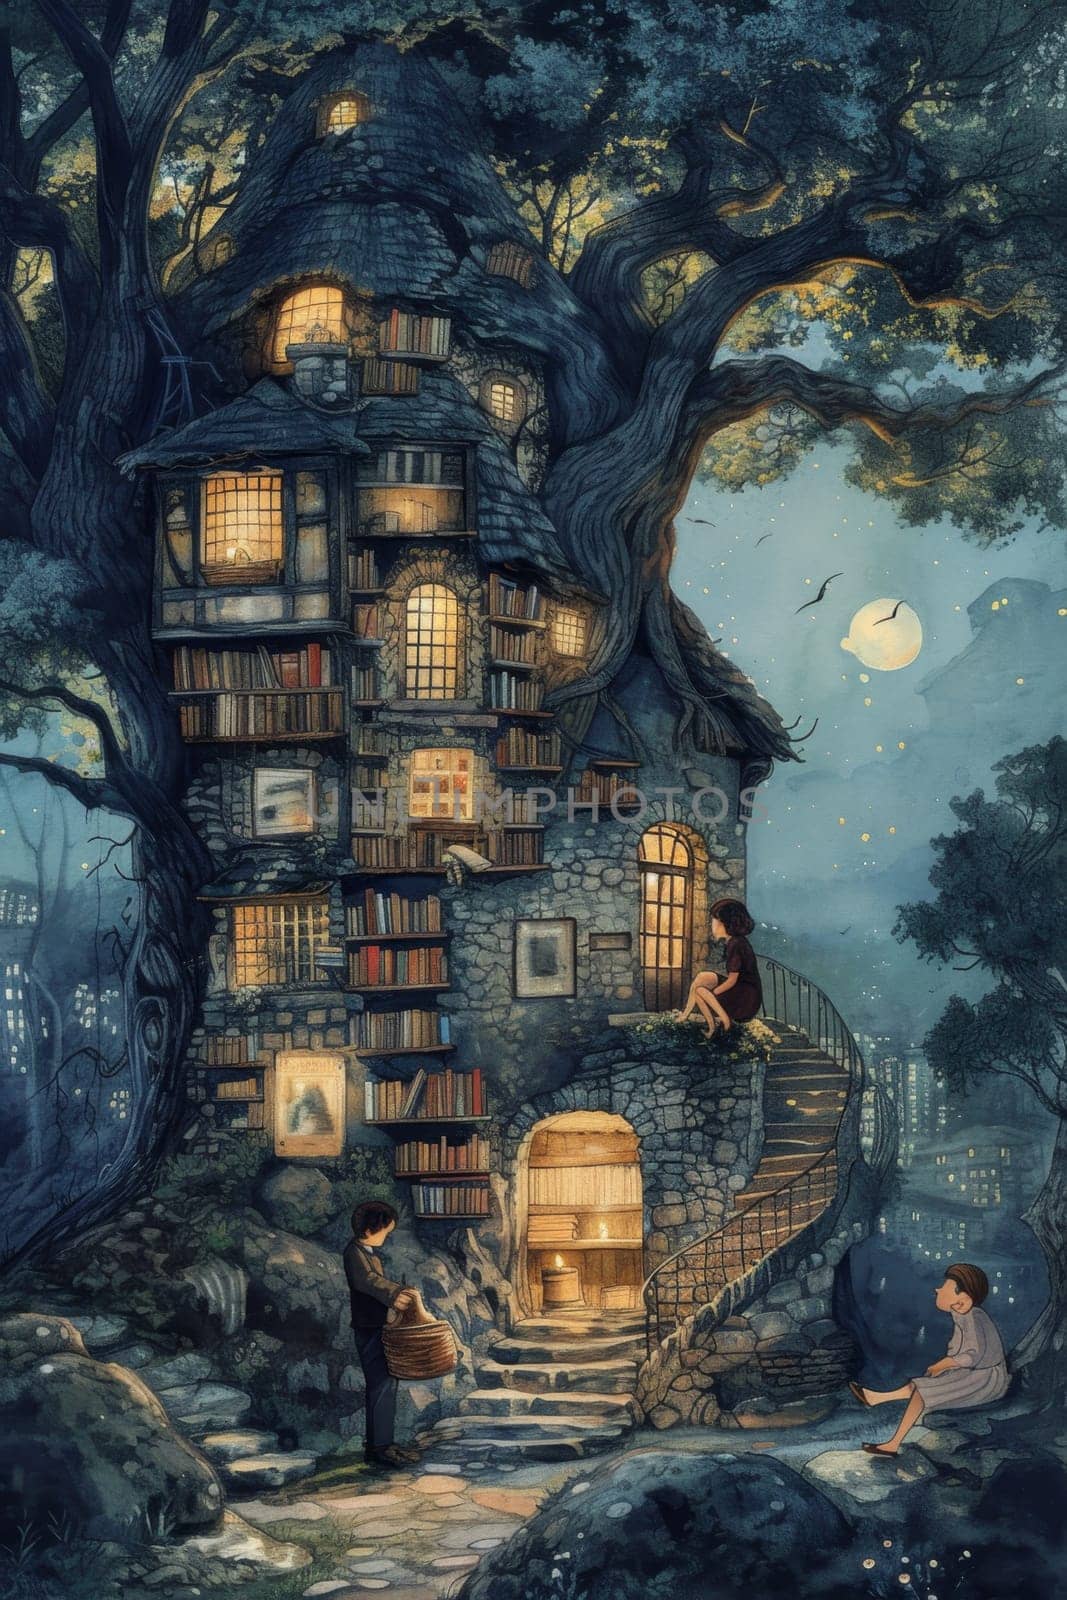 A fabulous house in the village at night . Illustration.